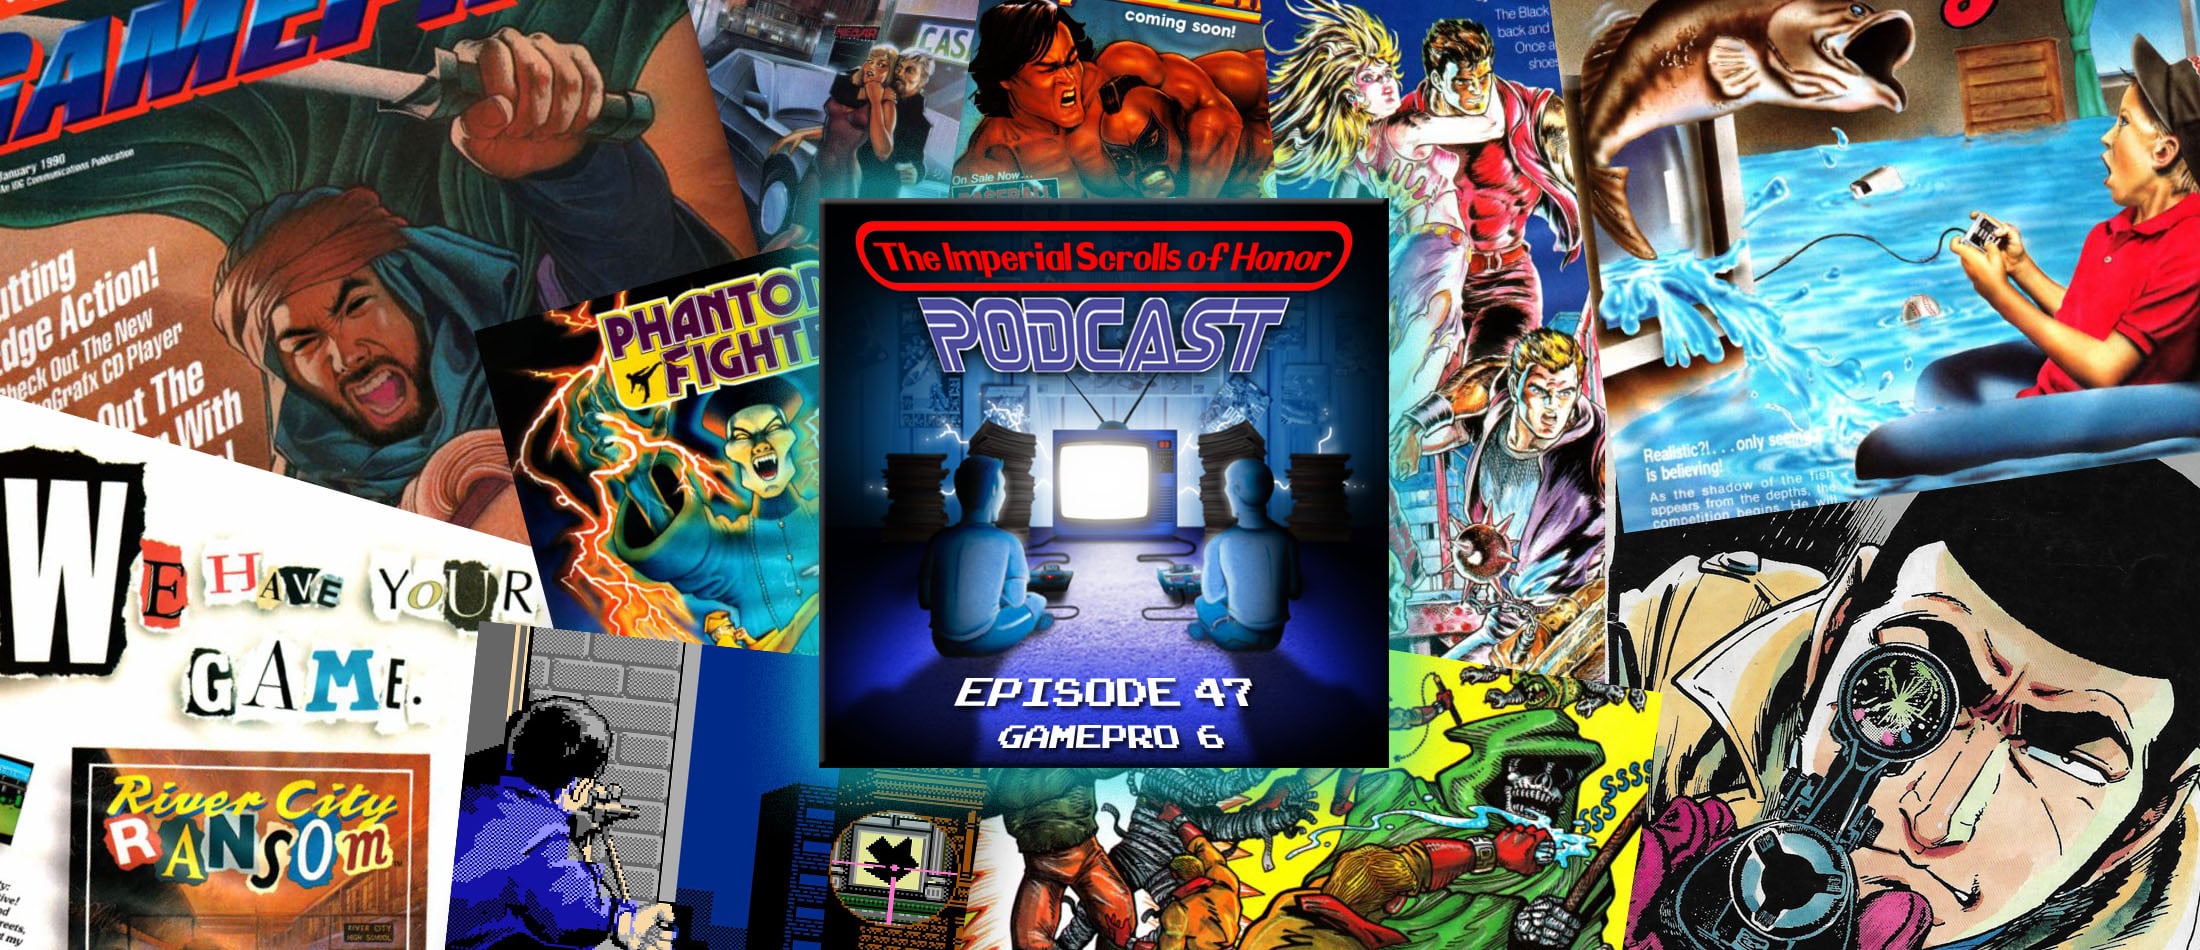 The Imperial Scrolls of Honor Podcast - Ep 47 - GamePro #6